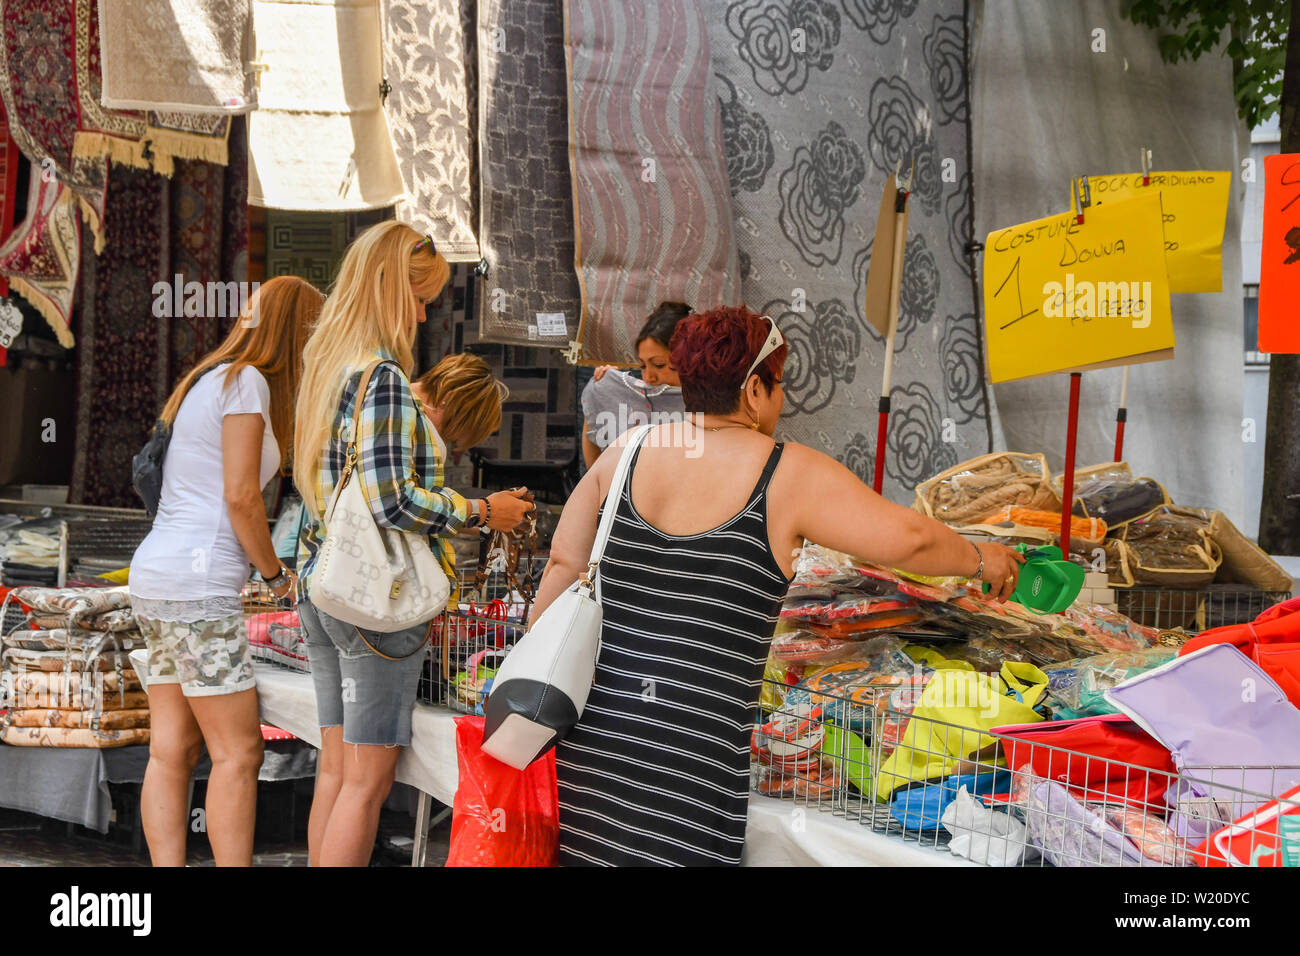 COMO, ITALY - JUNE 2019: People looking at goods on a stall in the outdoor market in Como on Lake Como. Stock Photo